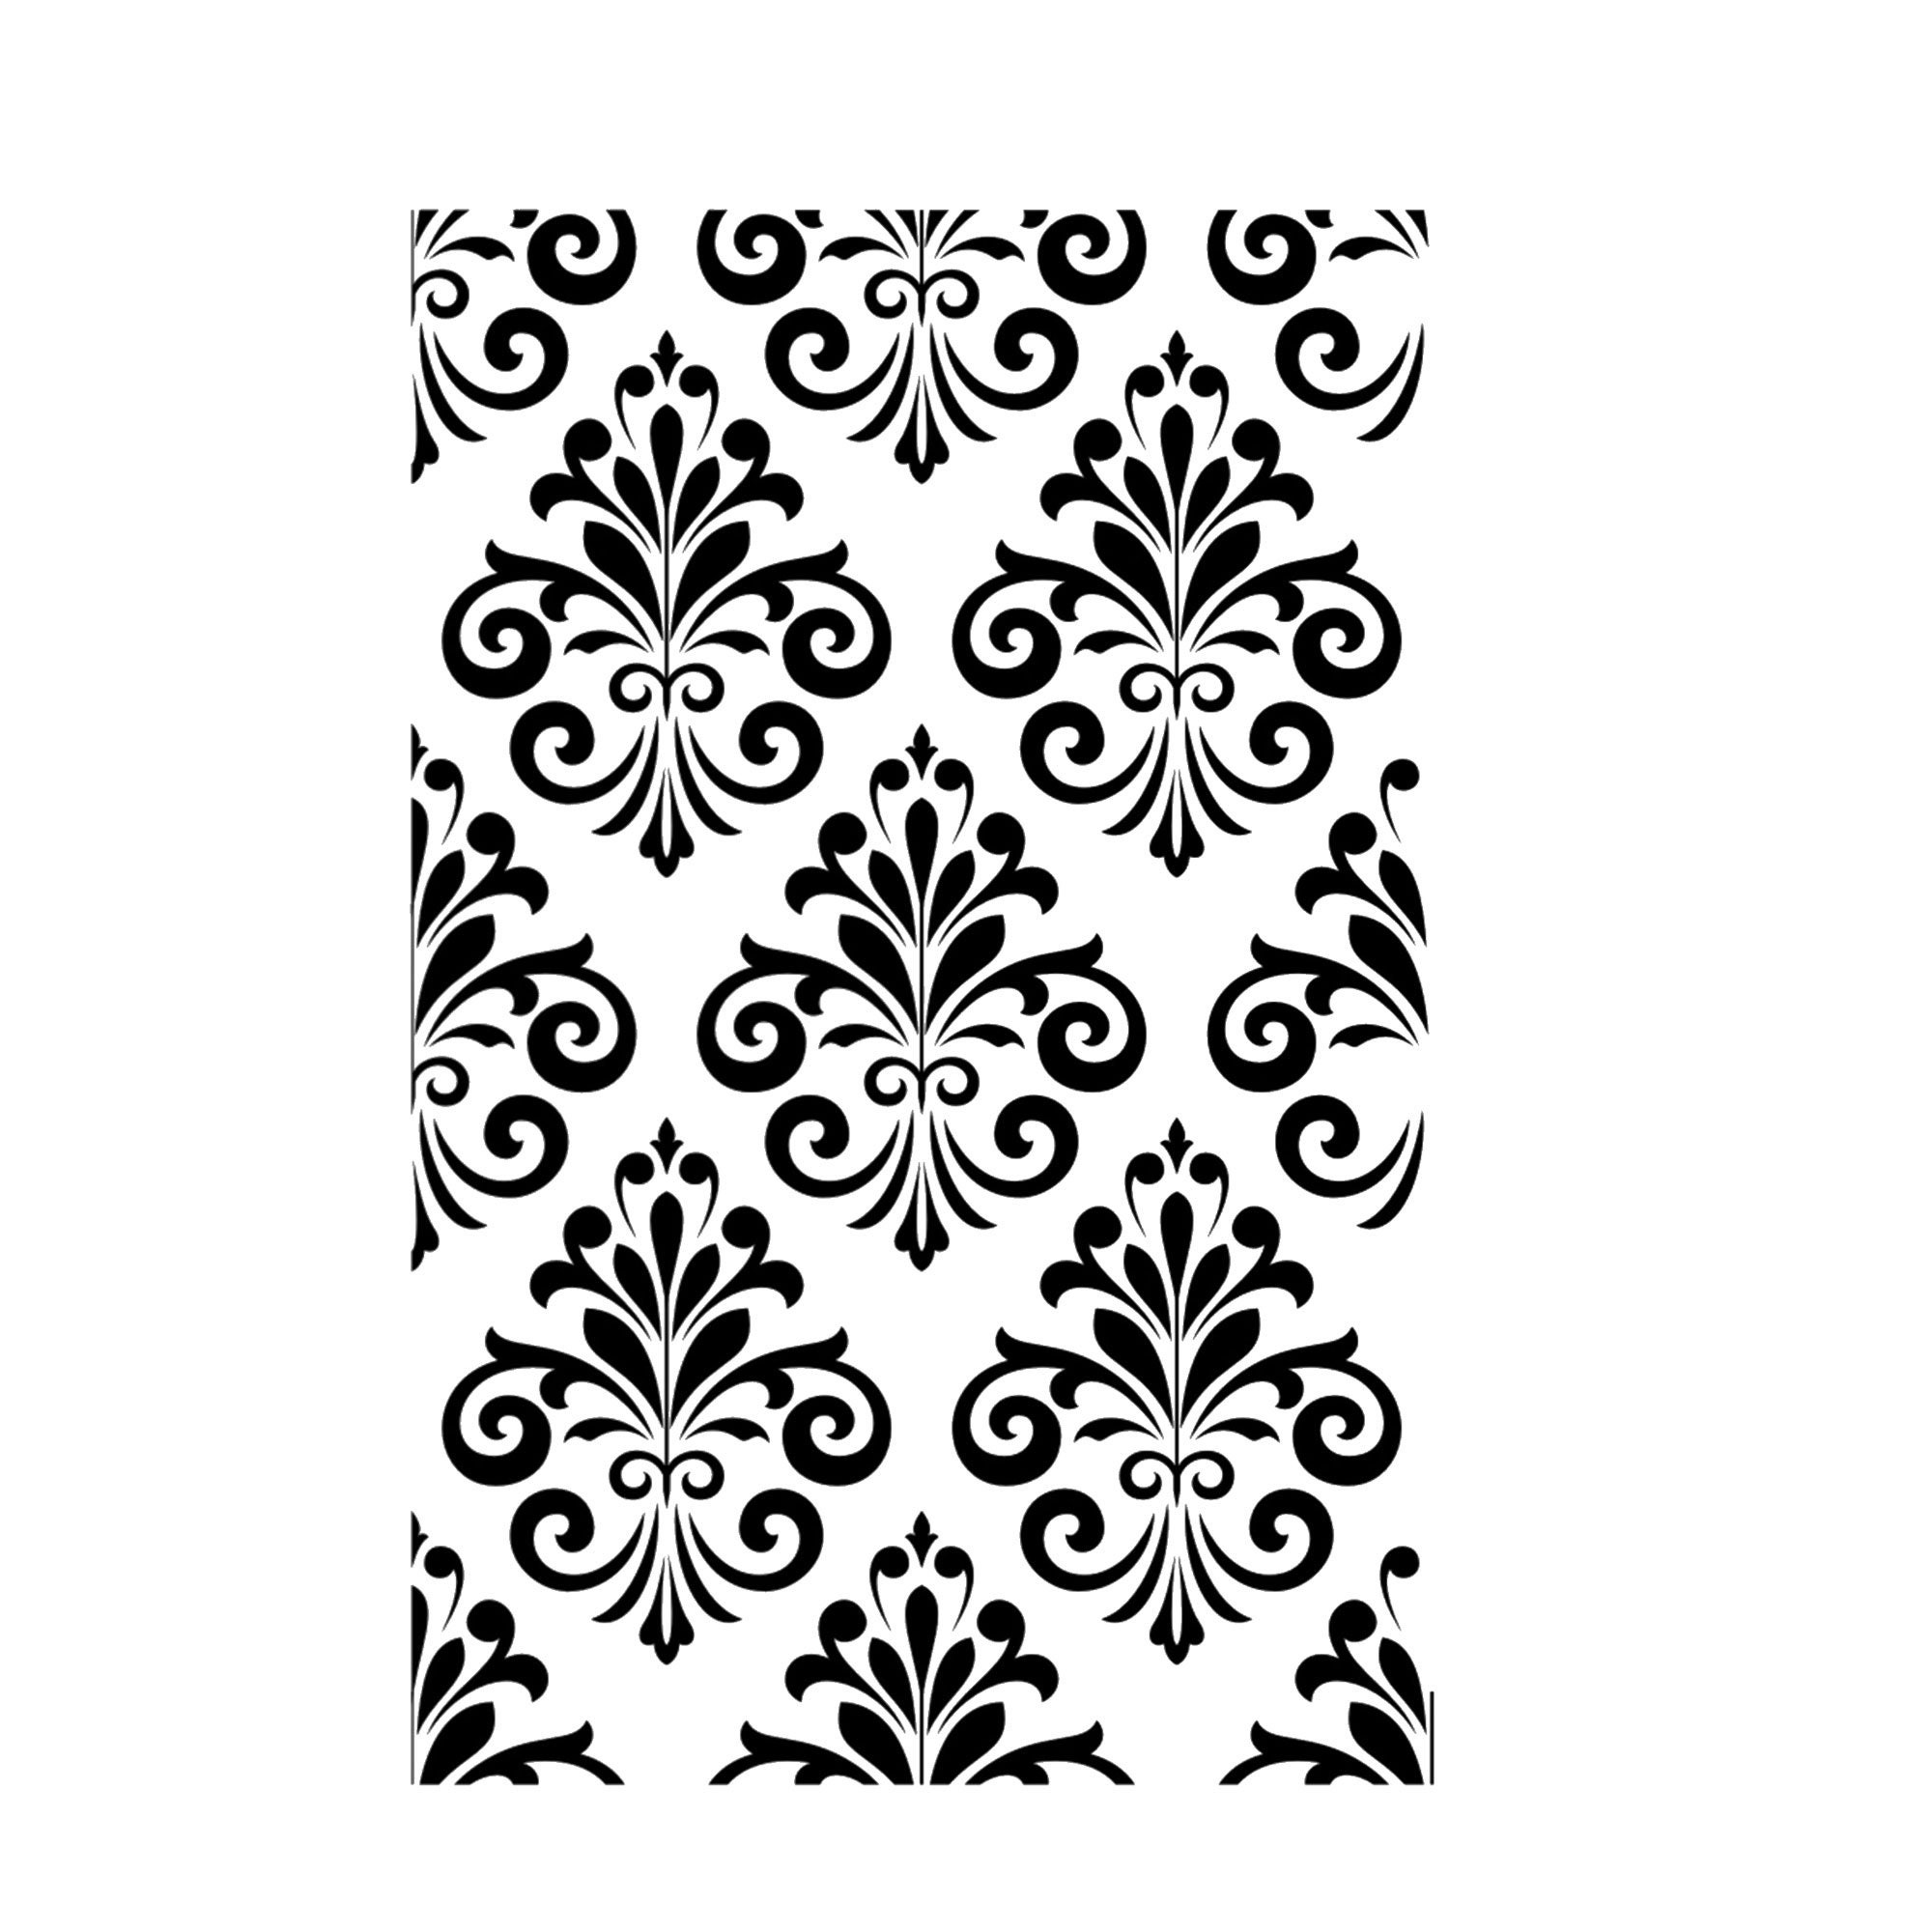 Damask Pattern Onlay Stencil Mold for Cakes and DIY Arts & Crafts